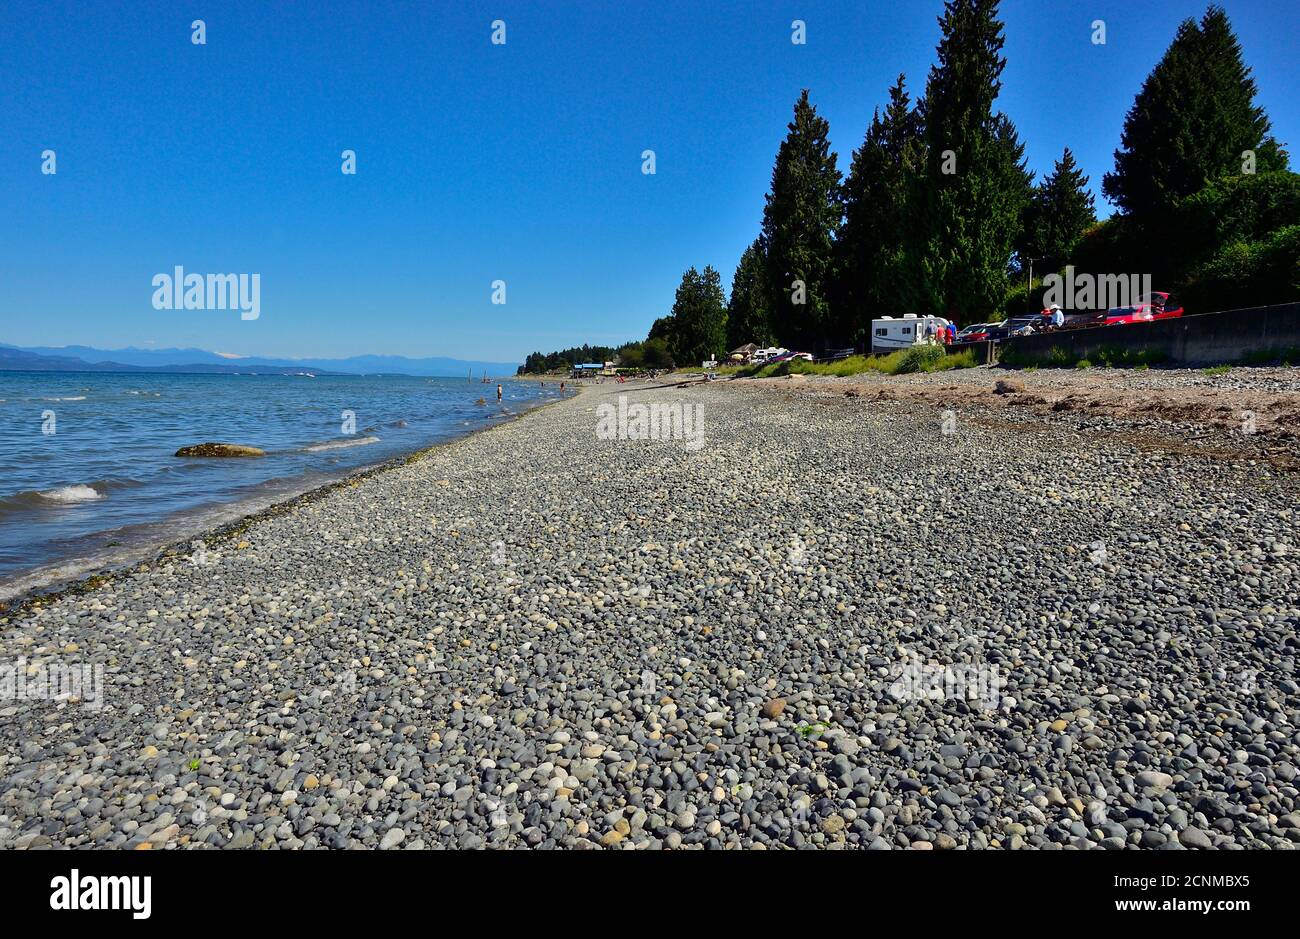 People enjoying a beautiful spring day relaxing and playing in the water at Qualicum Beach on Vancouver Island British Columbia Canada. Stock Photo